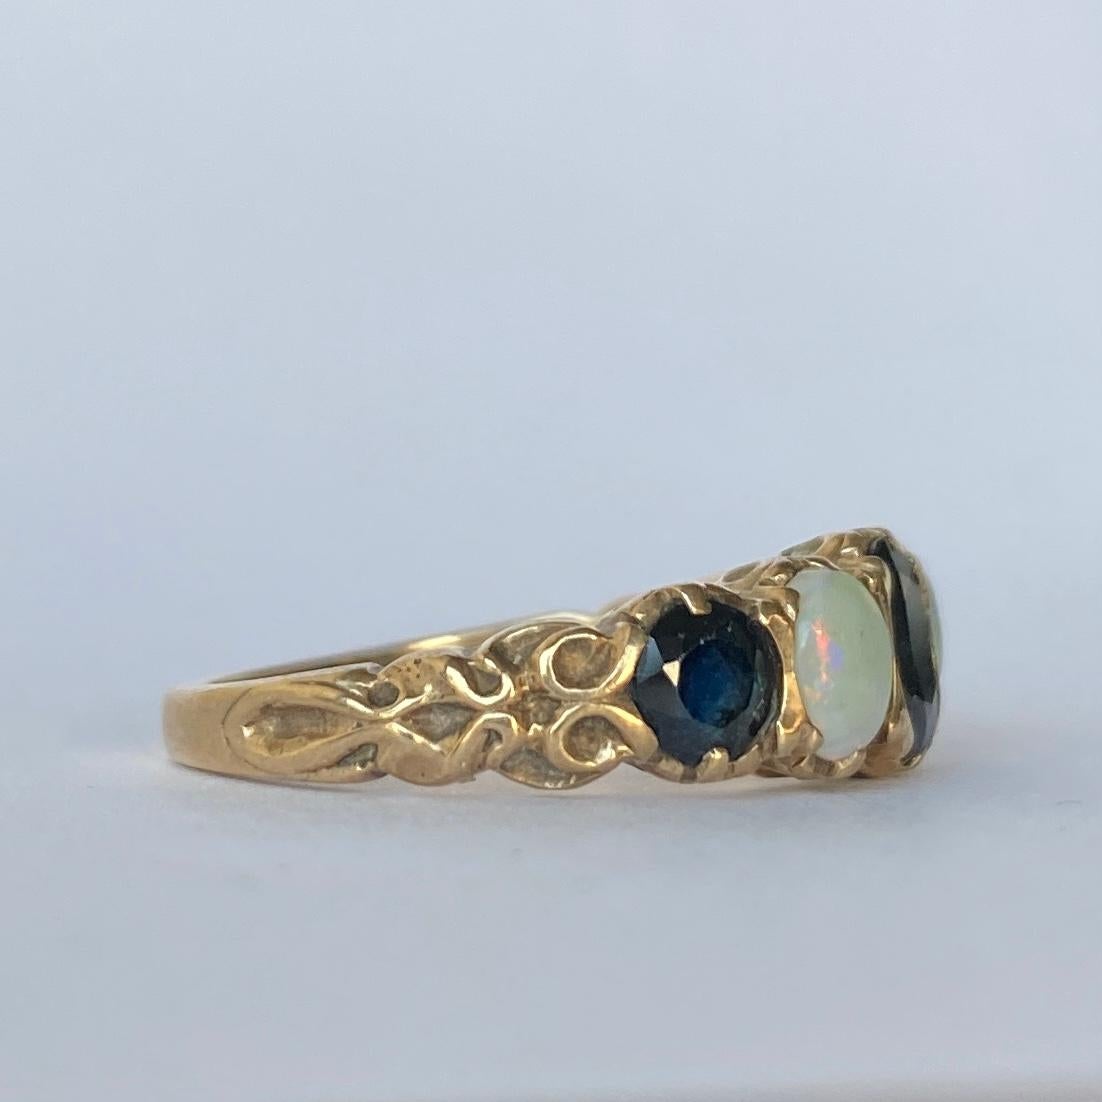 This gorgeous mix of inky blue sapphire and colourful opal is stunning. The sapphires total approx 90pts and in between these stones sit two opals. The ring is modelled in 9ct gold and was made in London, England. 

Ring Size: M 1/2 or 6 1/2 
Band